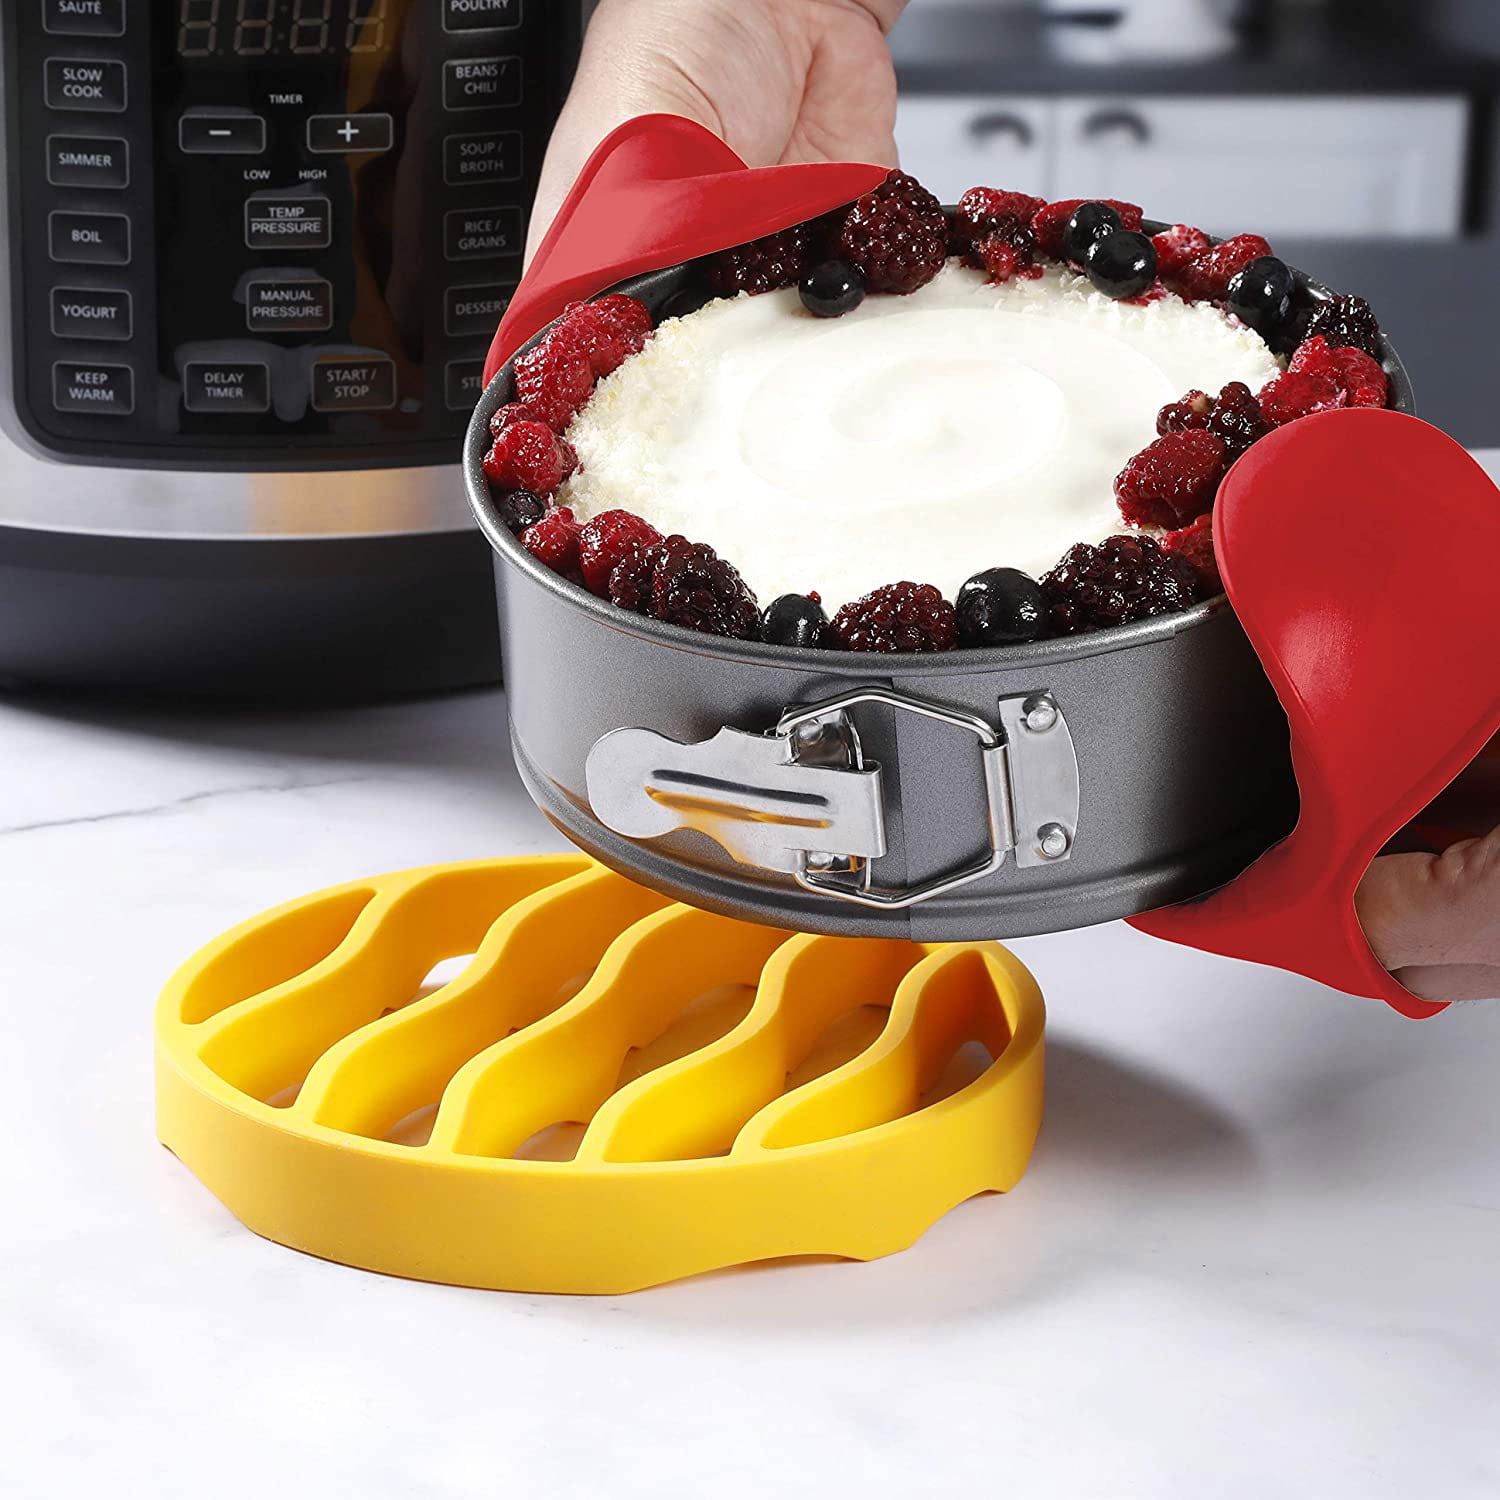 ONLY Crock Pot Express Accessories you Need!